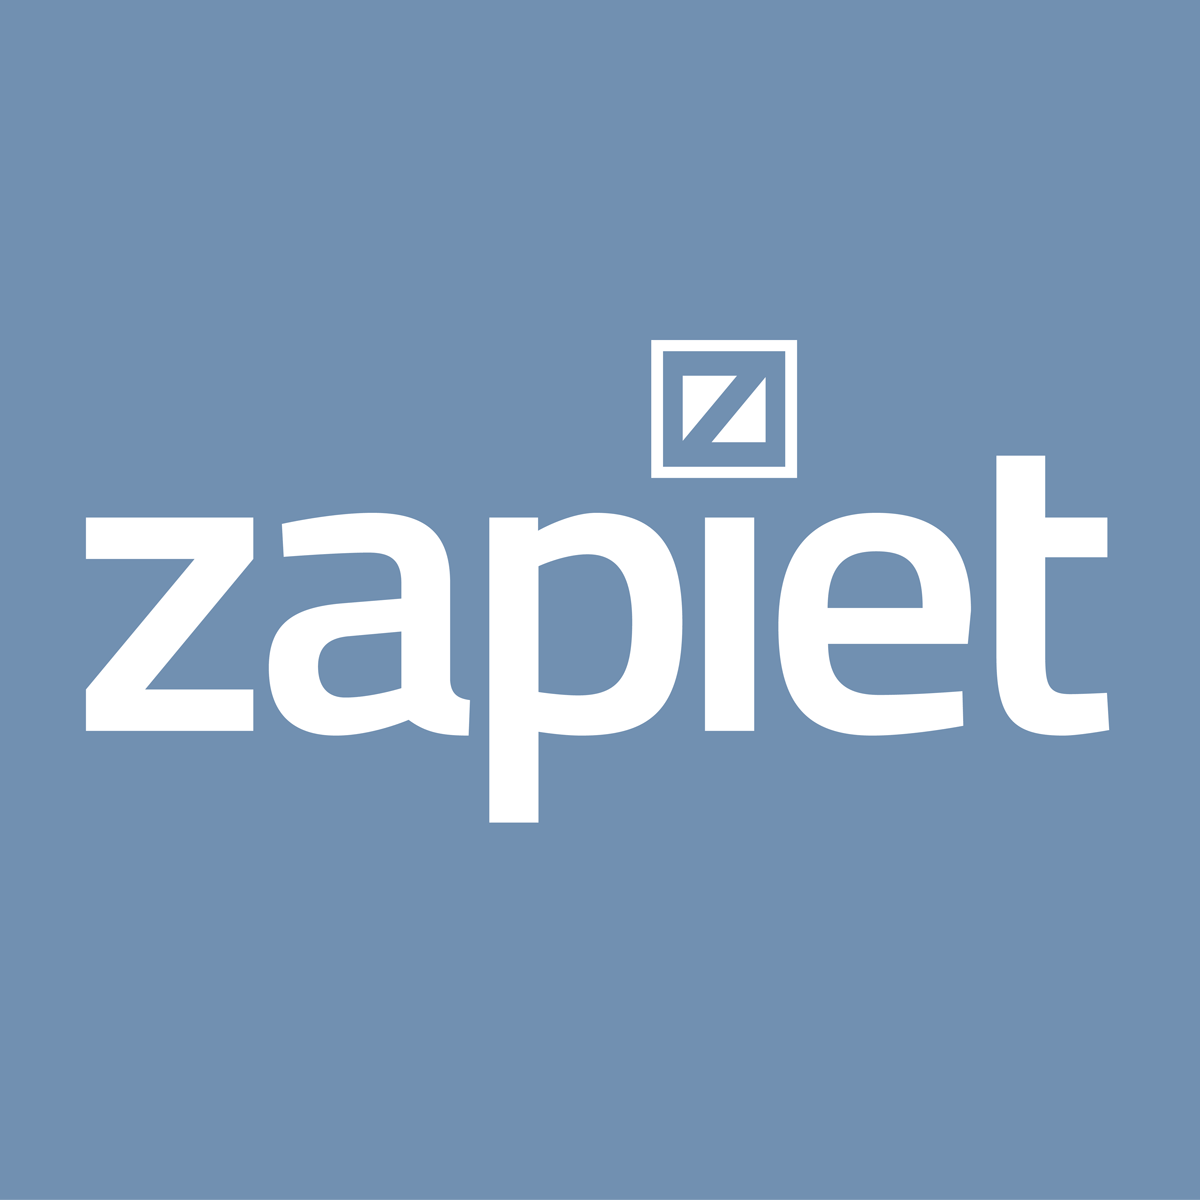 Hire Shopify Experts to integrate Zapiet ‑ Product Rates app into a Shopify store